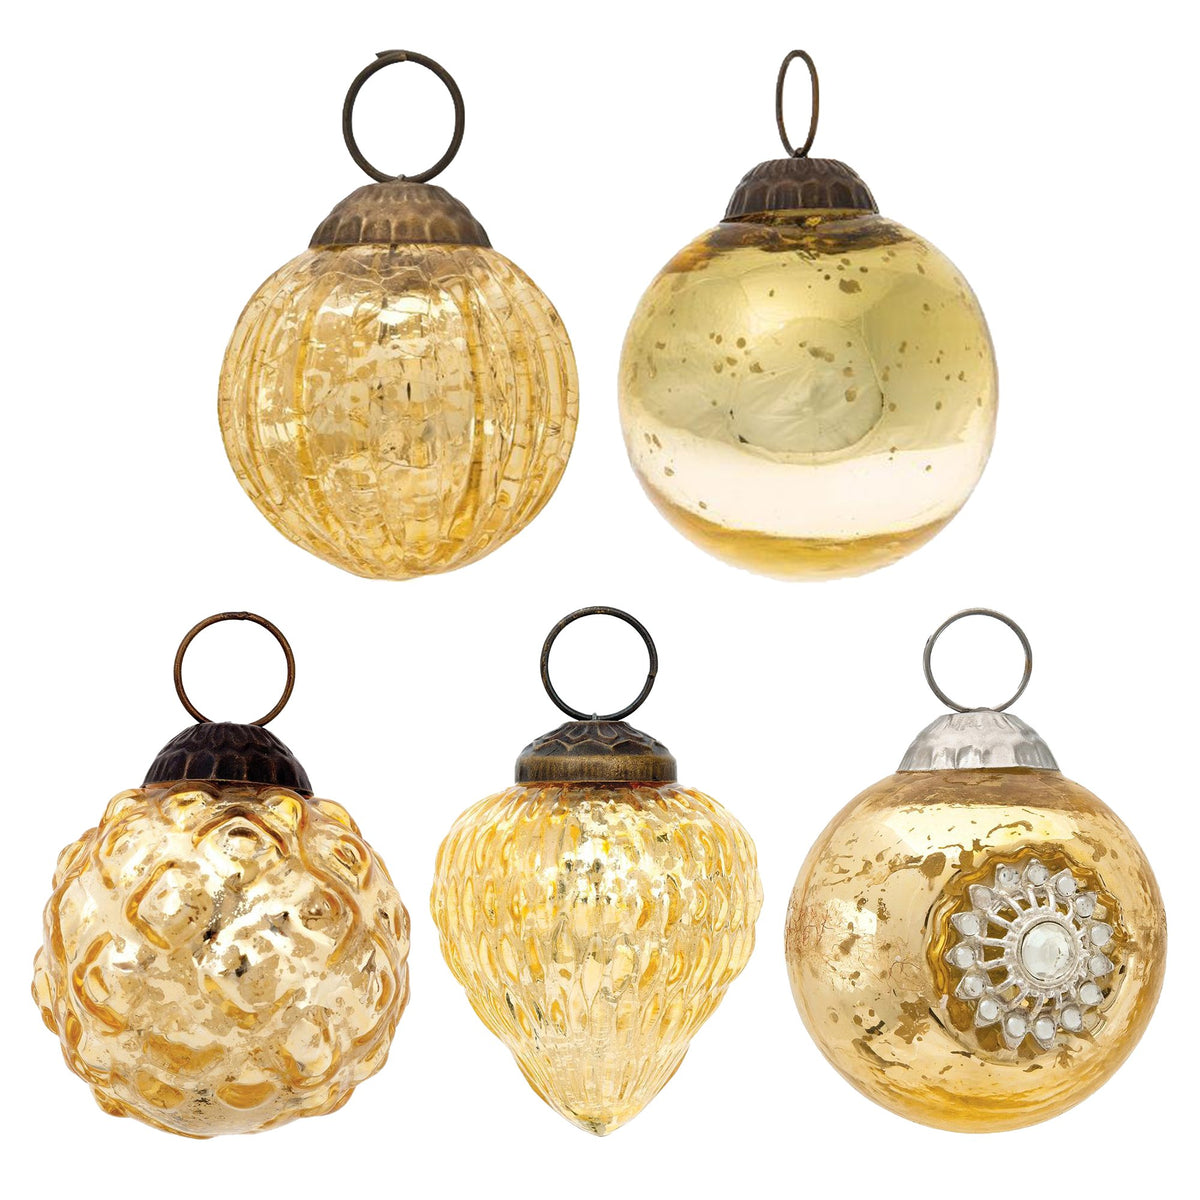 5 Pack | Gold Royal Chic Assorted Ornaments Set - Great Gift Idea, Vintage-Style Decorations for Christmas, Special Occasions, Home Decor and Parties